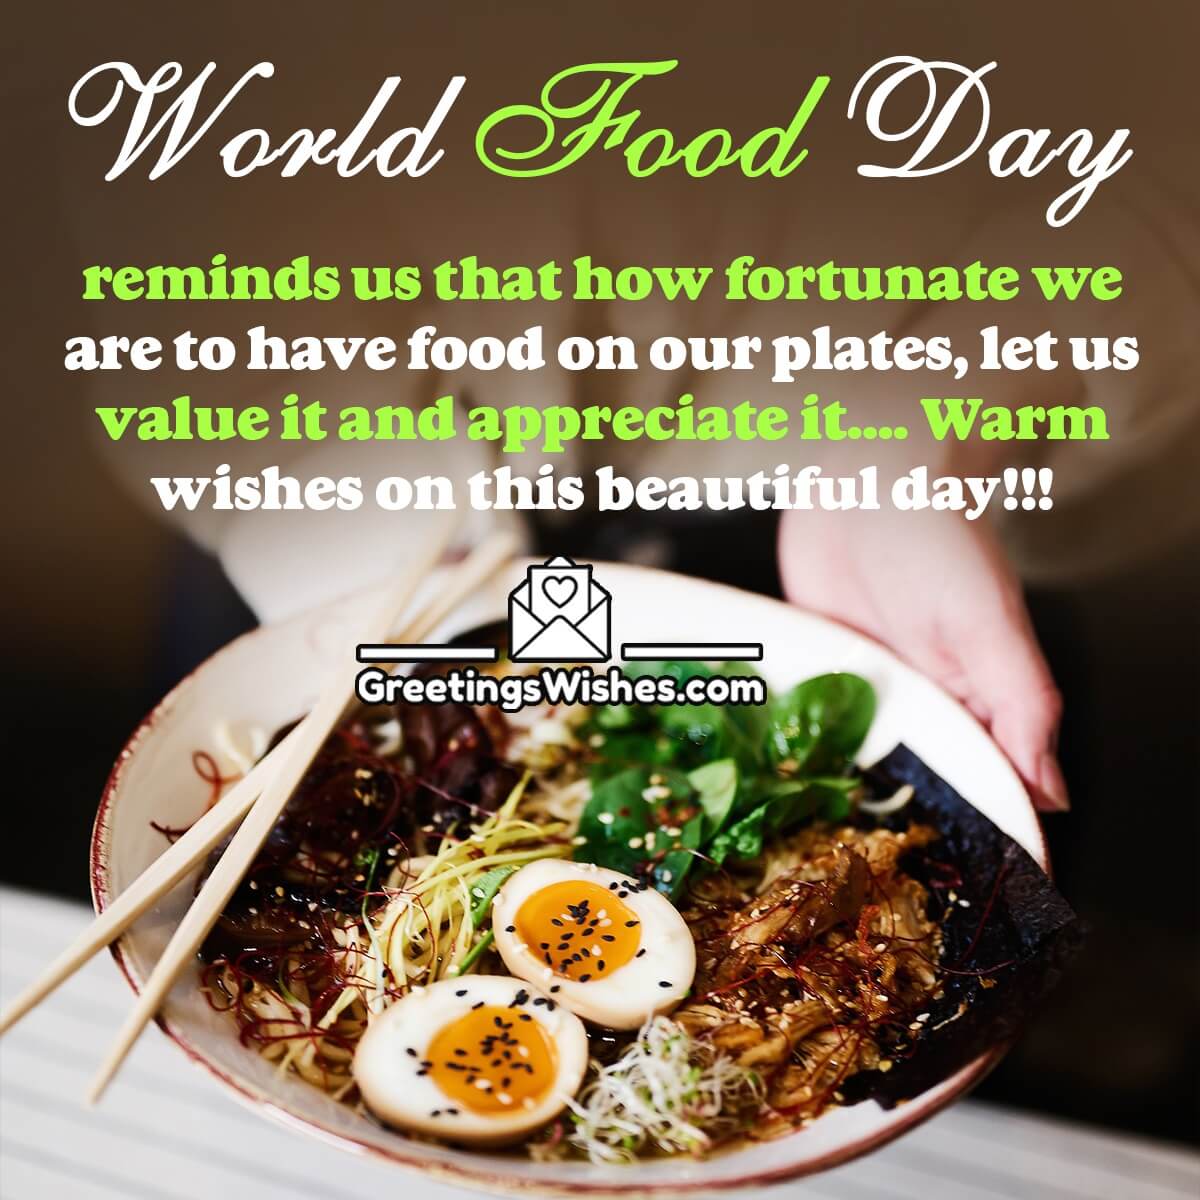 World Food Day Message